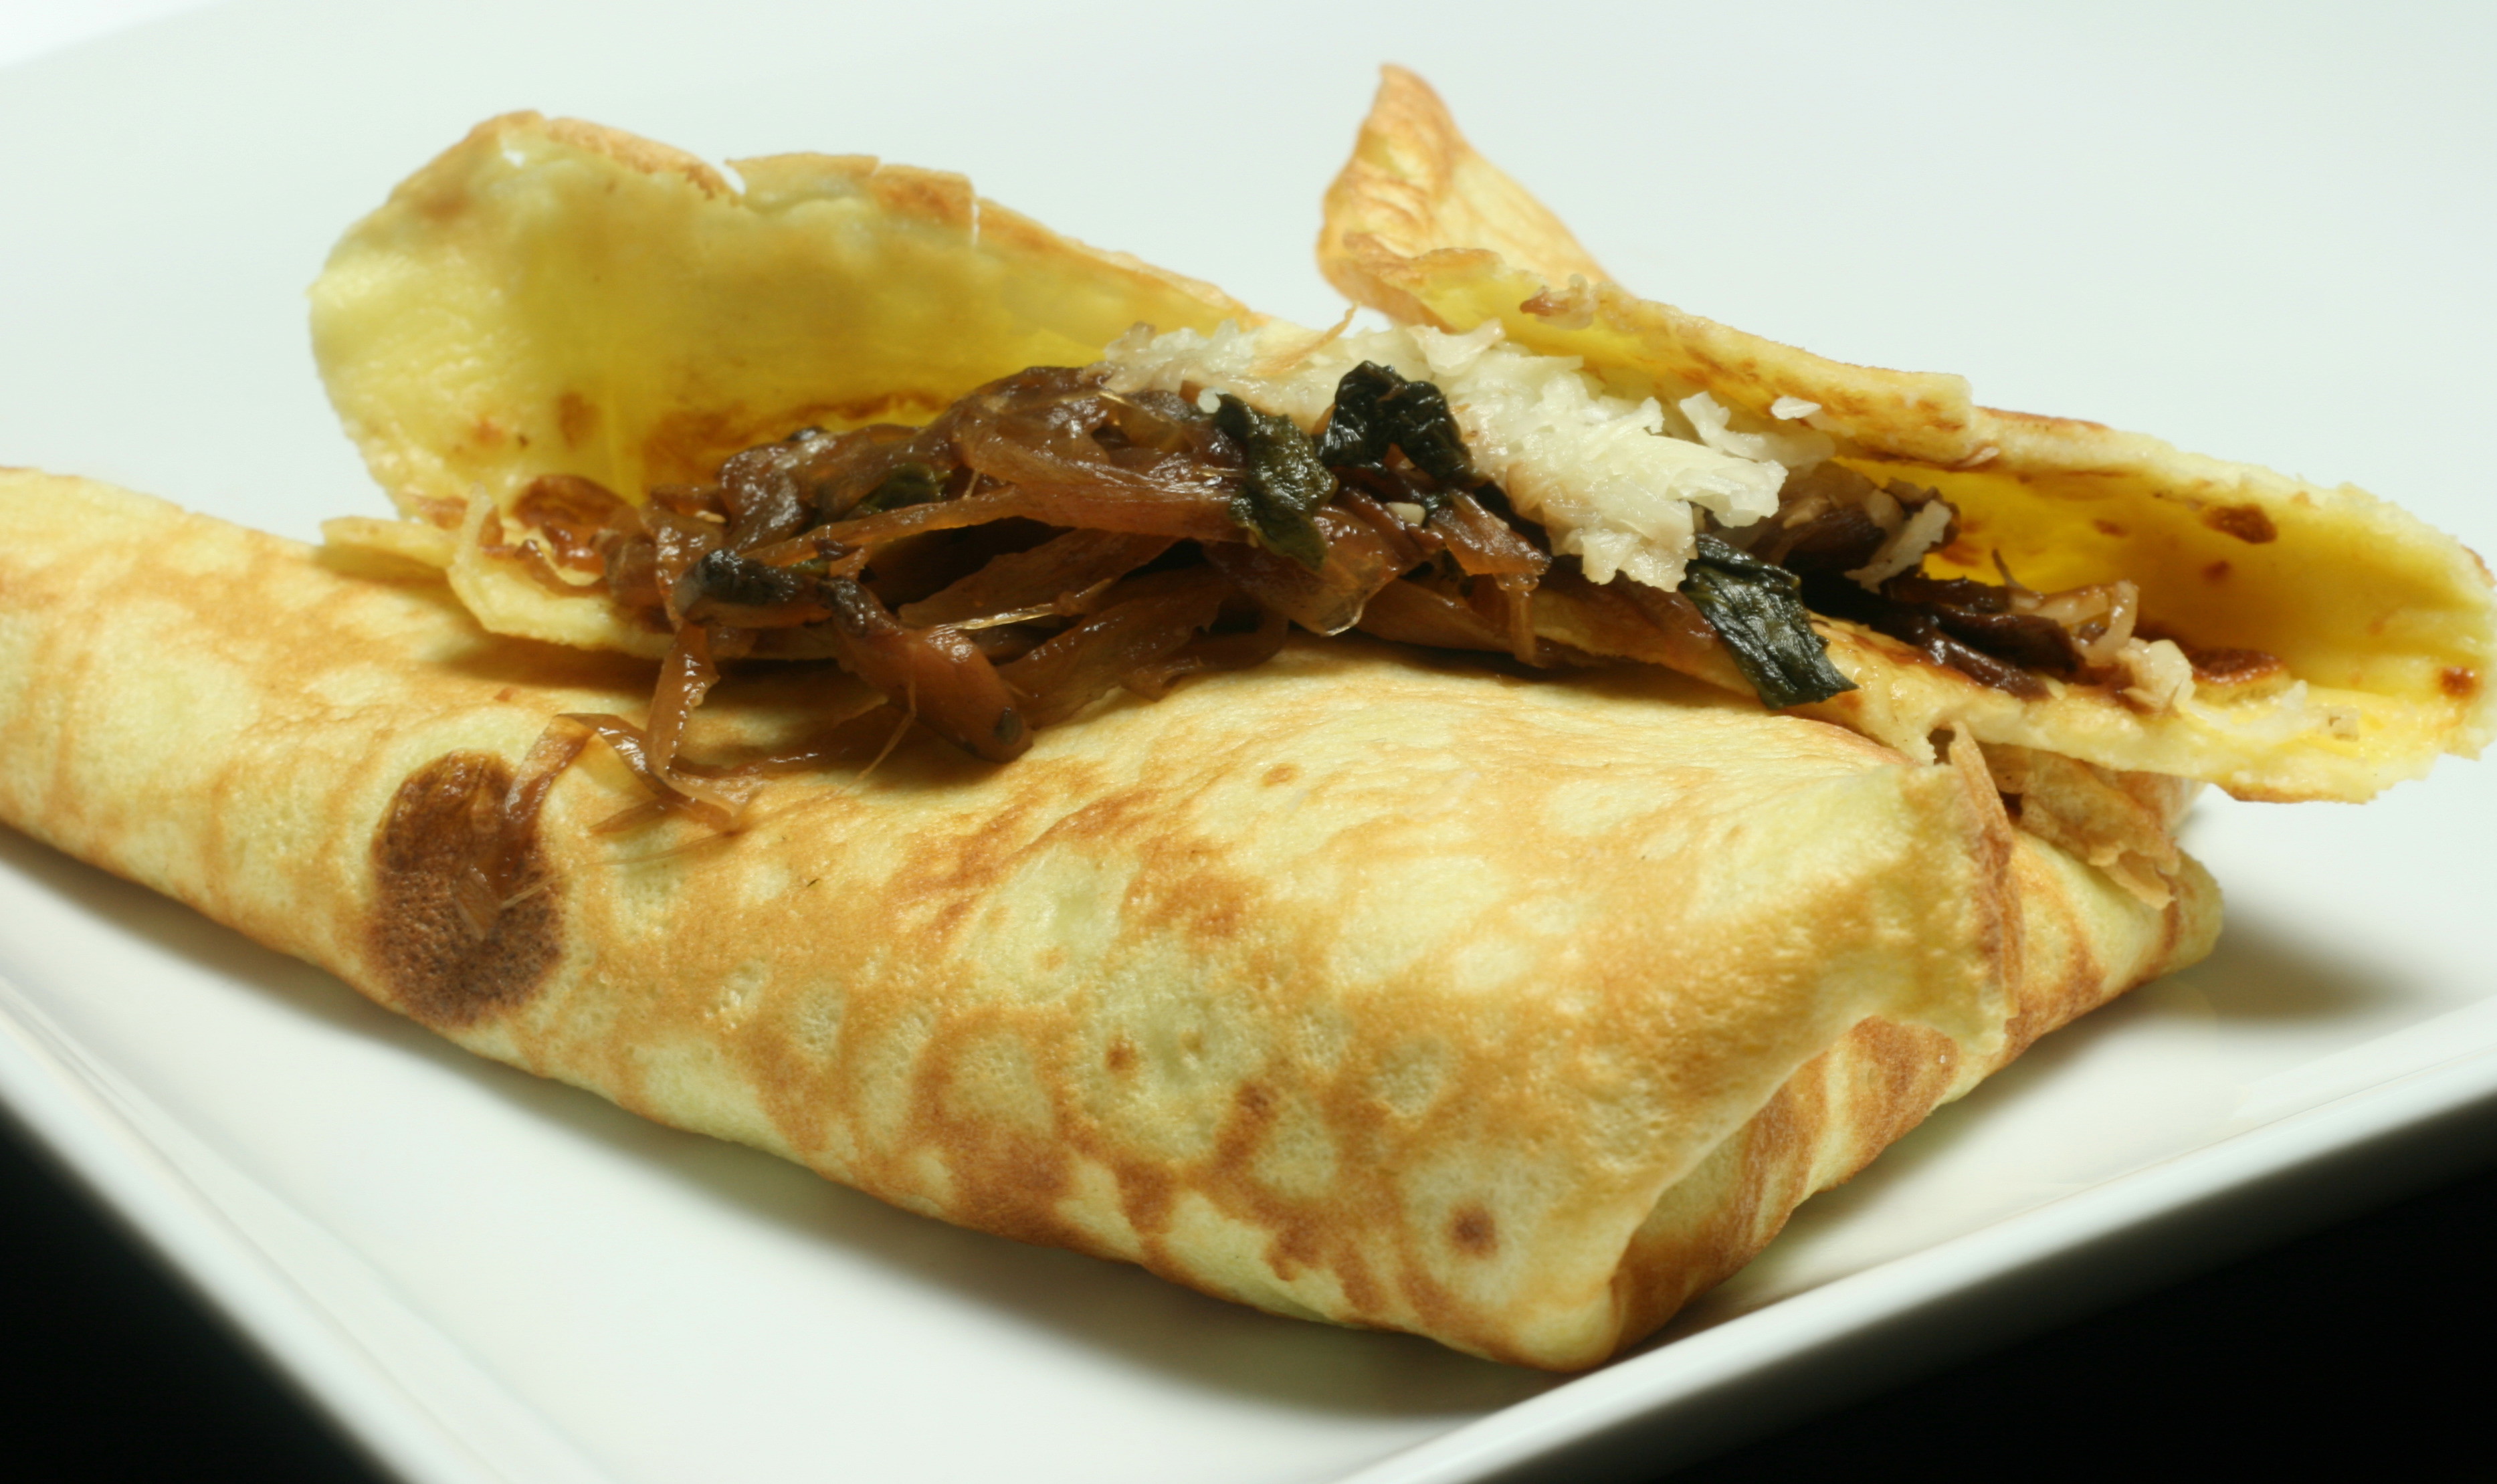  ... Carmelized Onions, Mushrooms and Spinach CREPES | Adventures in Shaw